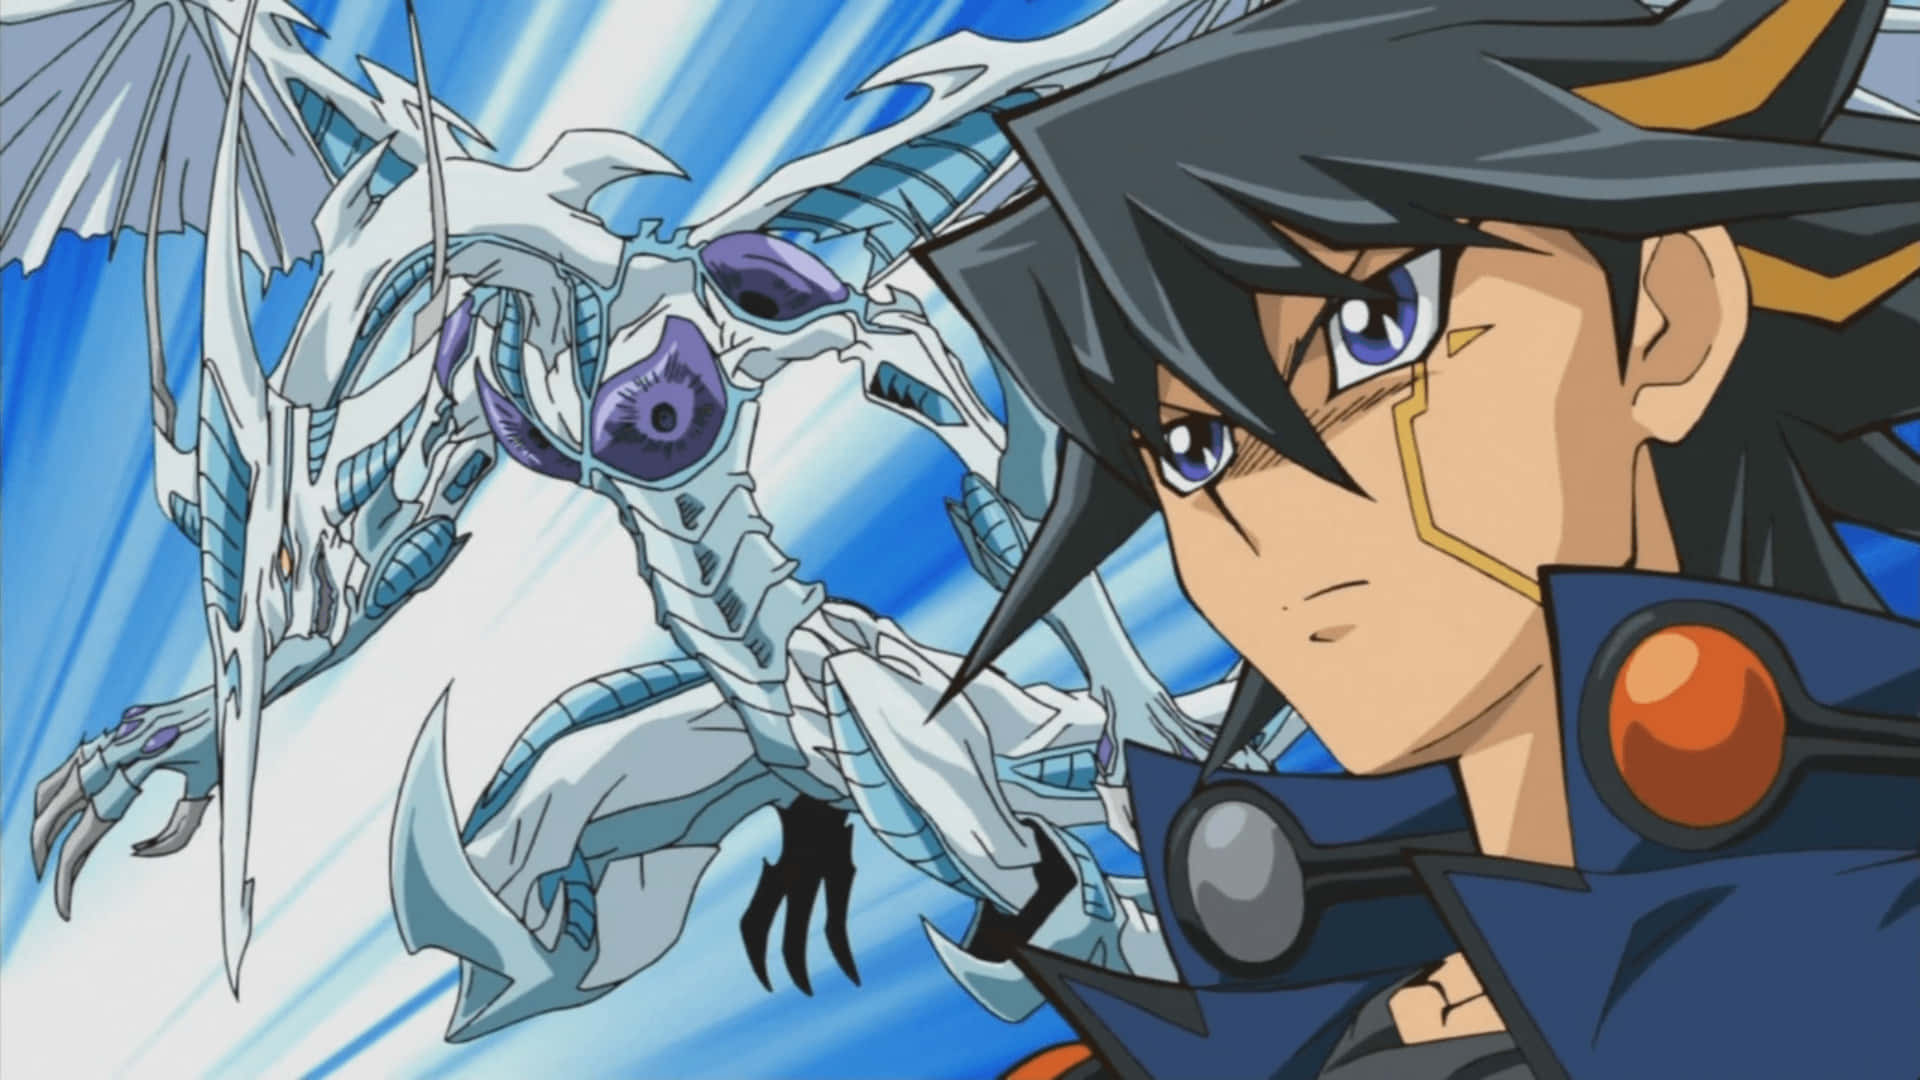 Download Yusei Fudo from Yu-Gi-Oh! 5D's in an intense duel against